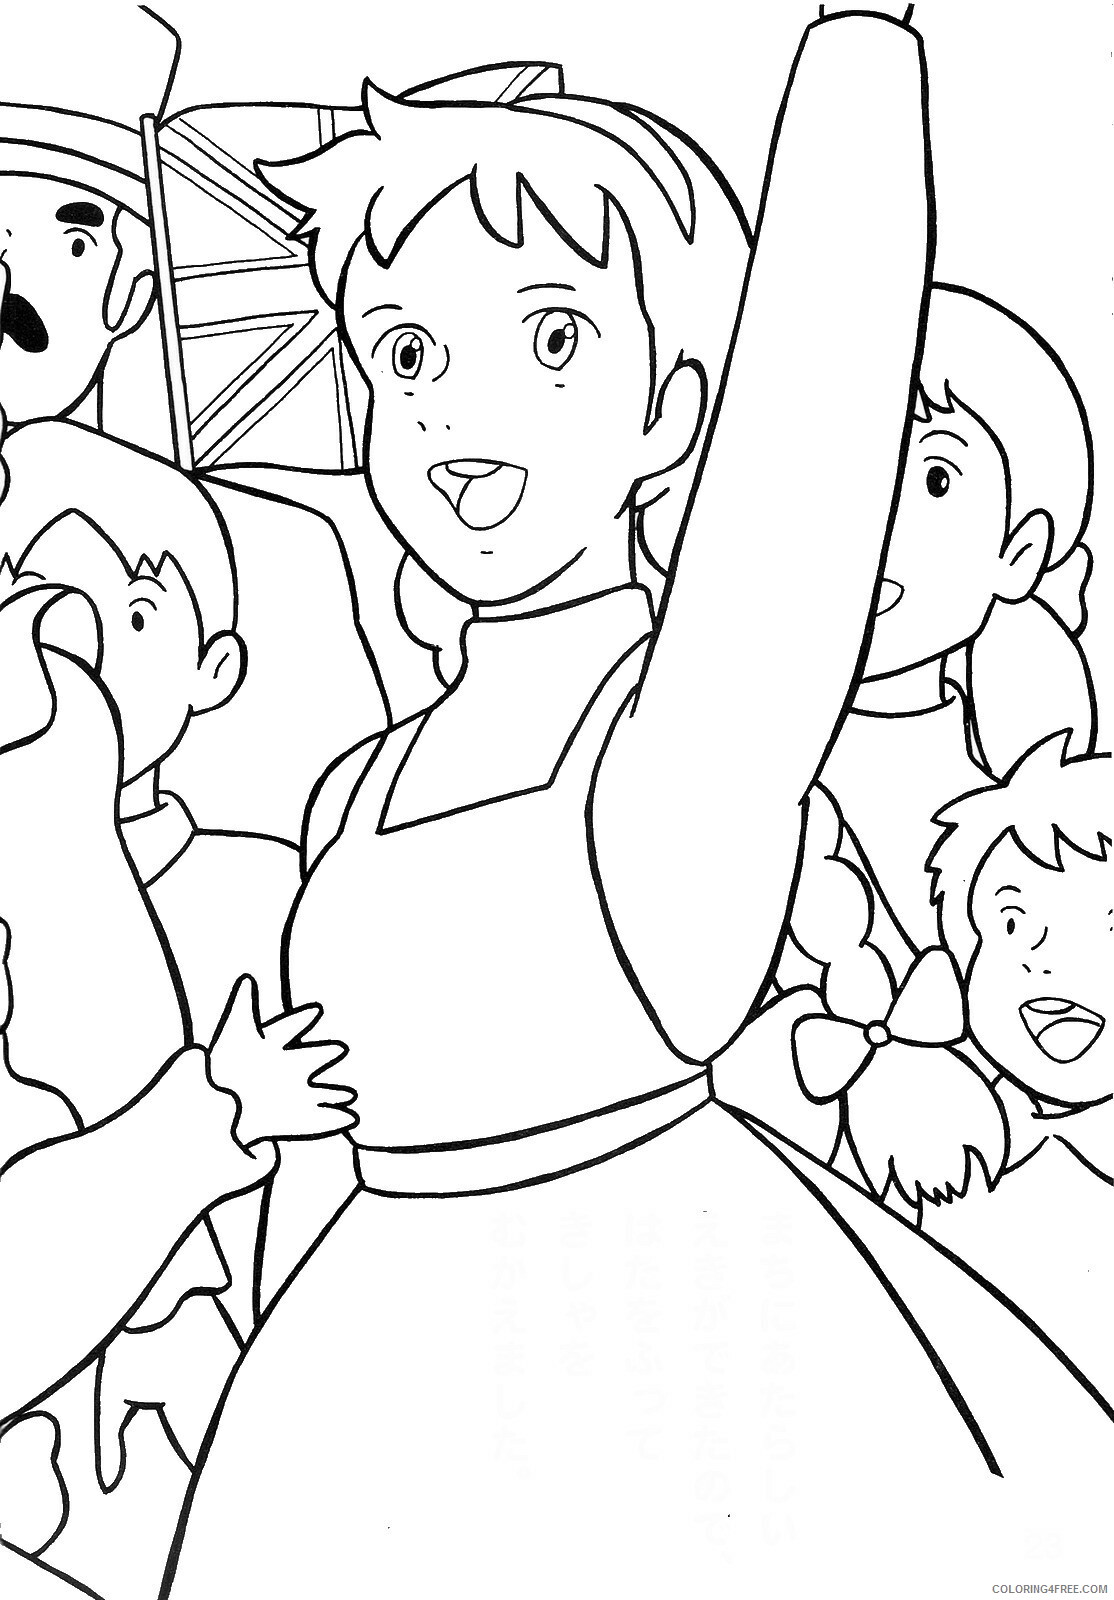 Anne of Green Gables Coloring Pages TV Film anne green gables 23 Printable 2020 00151 Coloring4free